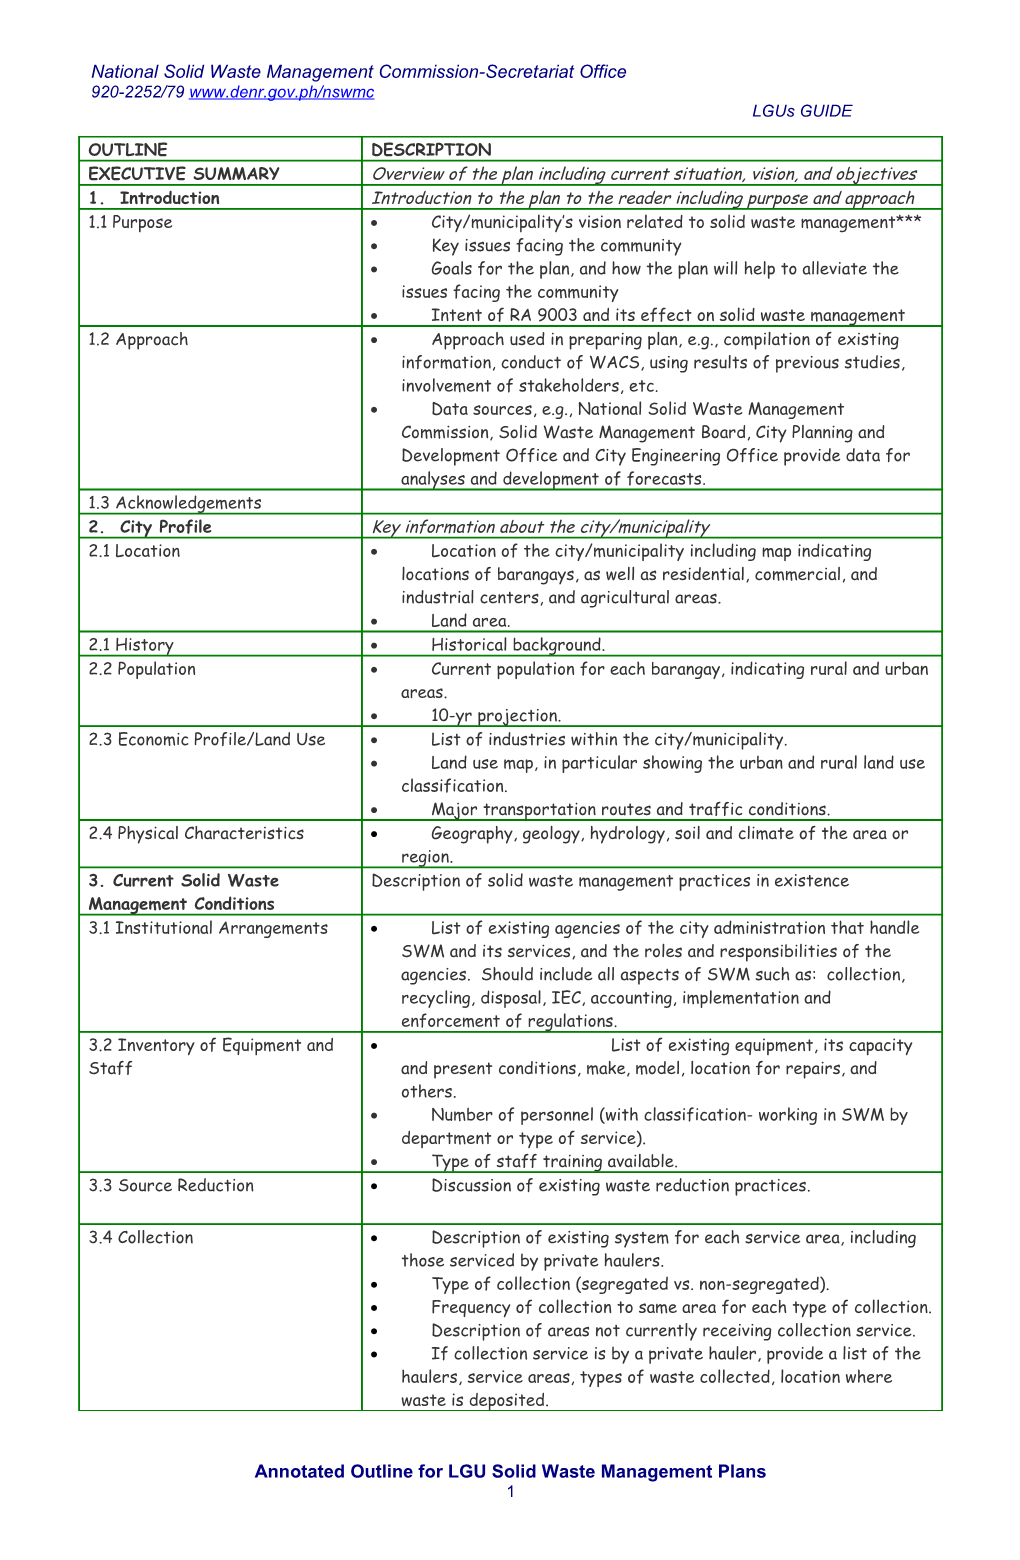 Annotated Outline for LGU Solid Waste Management Plans